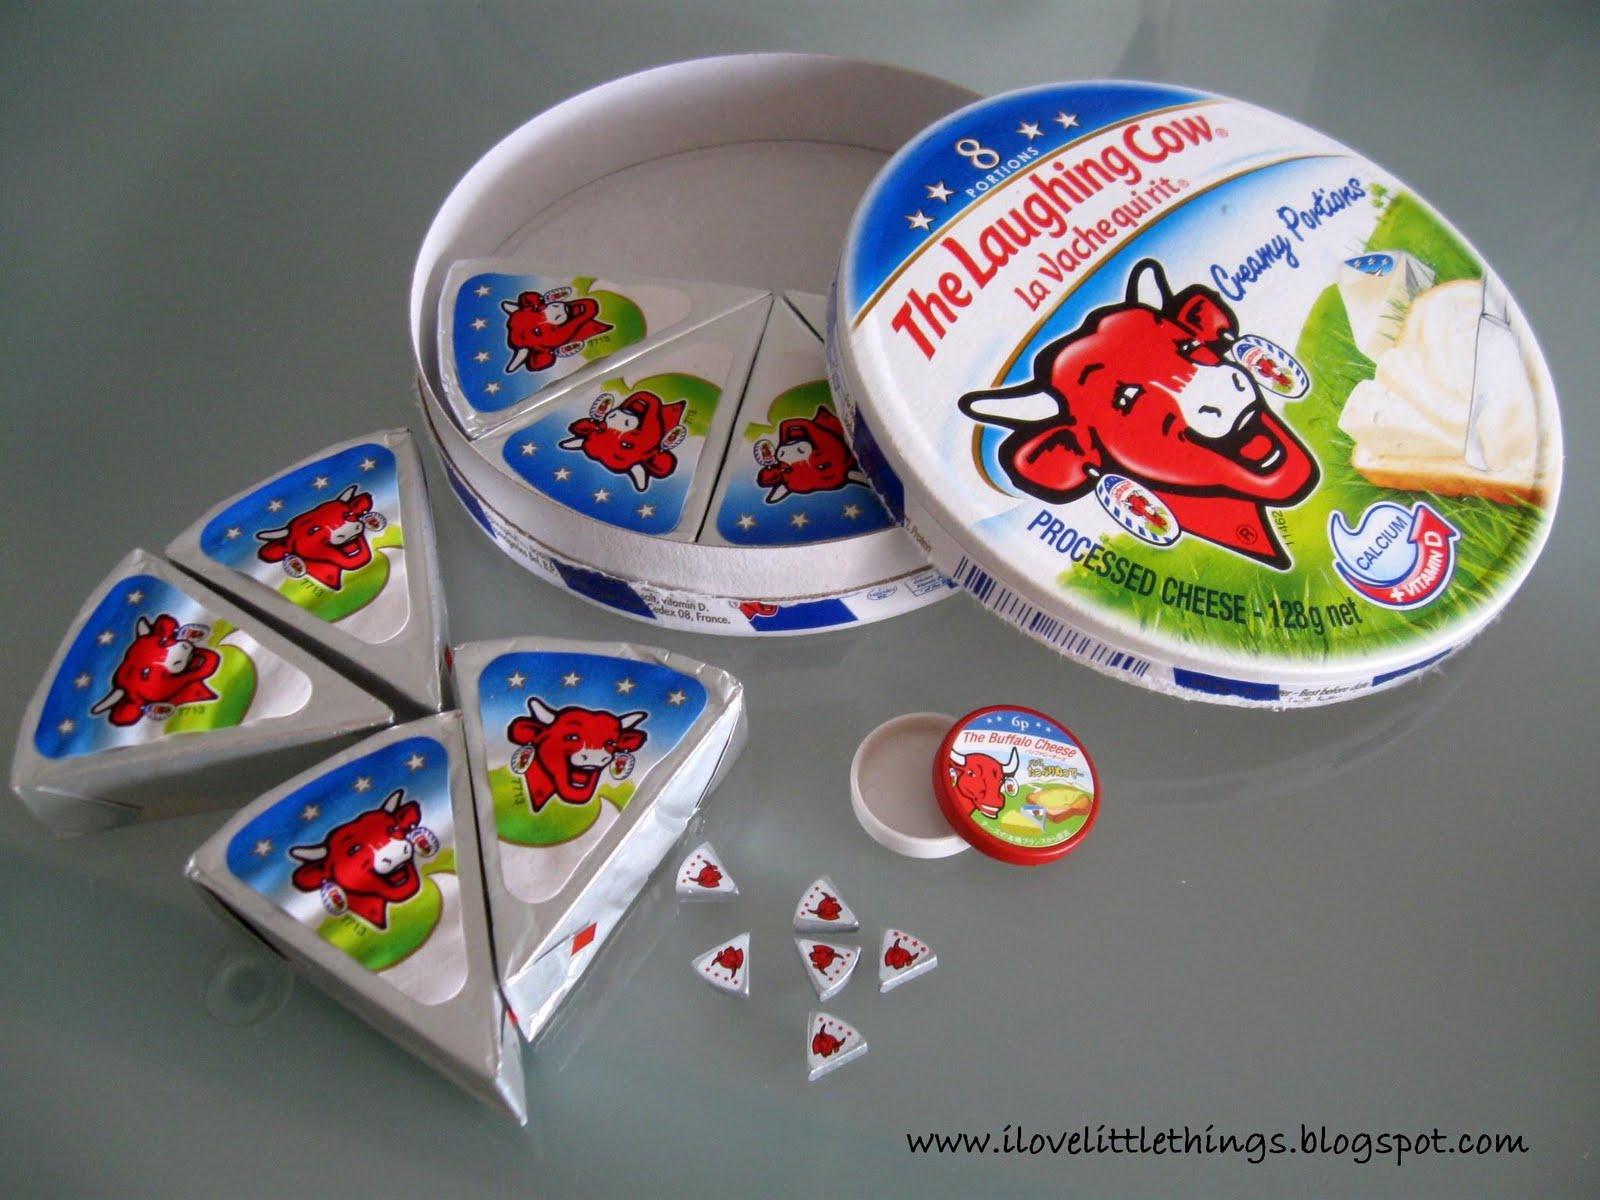 Cow Triangle Logo - Miniatures By I Love Little Things: Re Ment's Laughing Cow